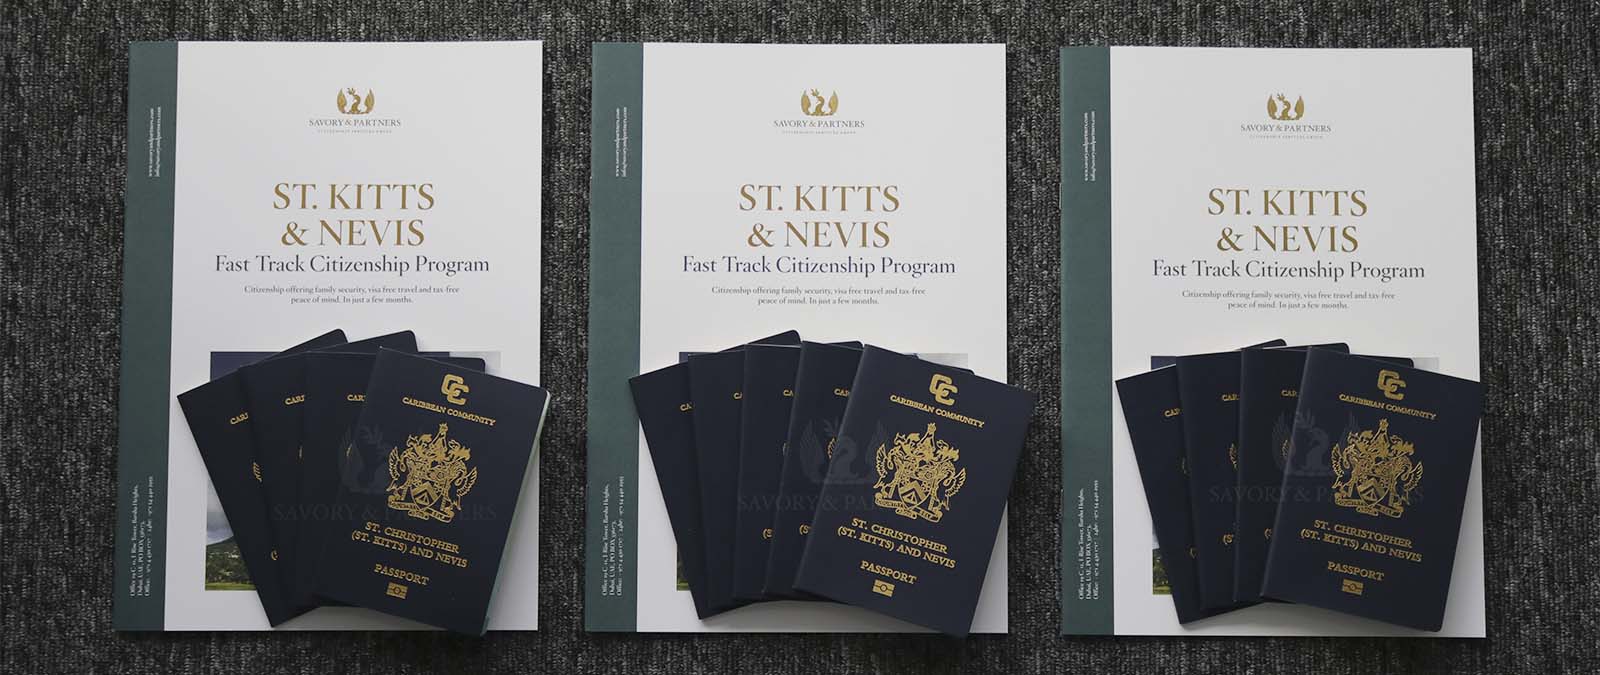 You can get the citizenship and passport of St Kitts and Nevis in exchange for a donation of USD150,000 or by real estate investment of at least USD200,000